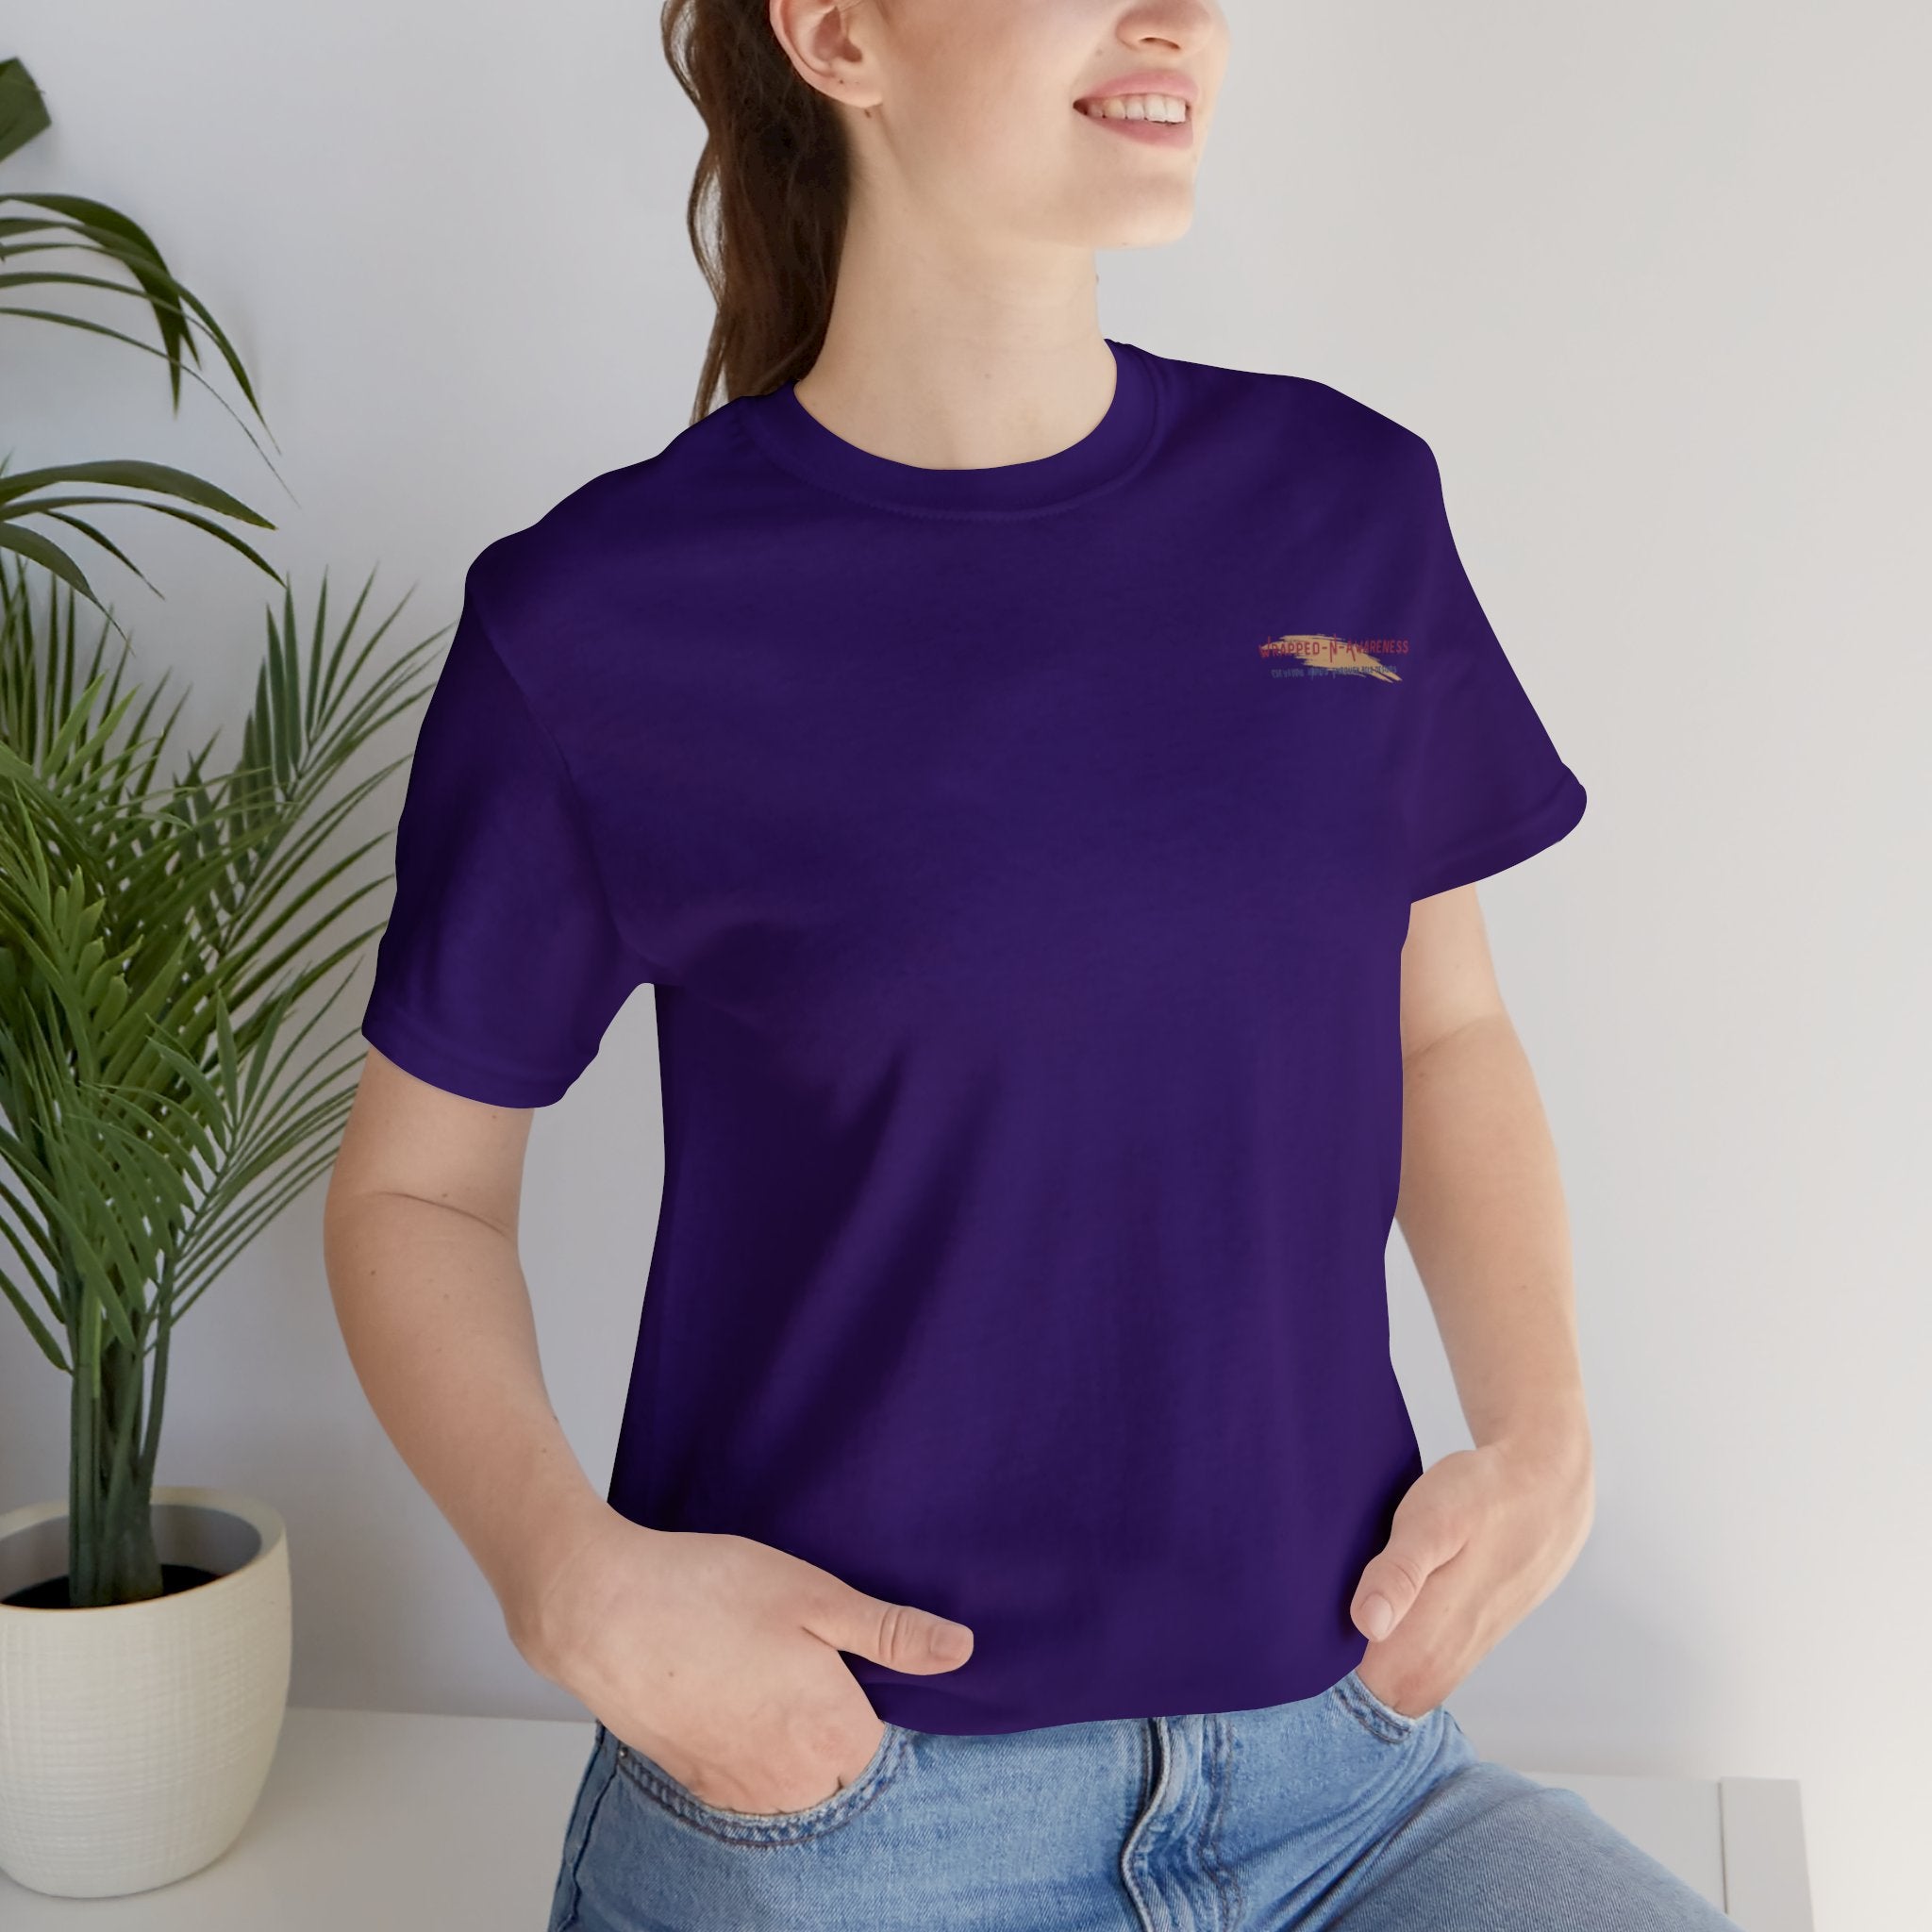 Inspire Growth Jersey Tee - Bella+Canvas 3001 Turquoise Airlume Cotton Bella+Canvas 3001 Crew Neckline Jersey Short Sleeve Lightweight Fabric Mental Health Support Retail Fit Tear-away Label Tee Unisex Tee T-Shirt 17889958769127421198_2048 Printify